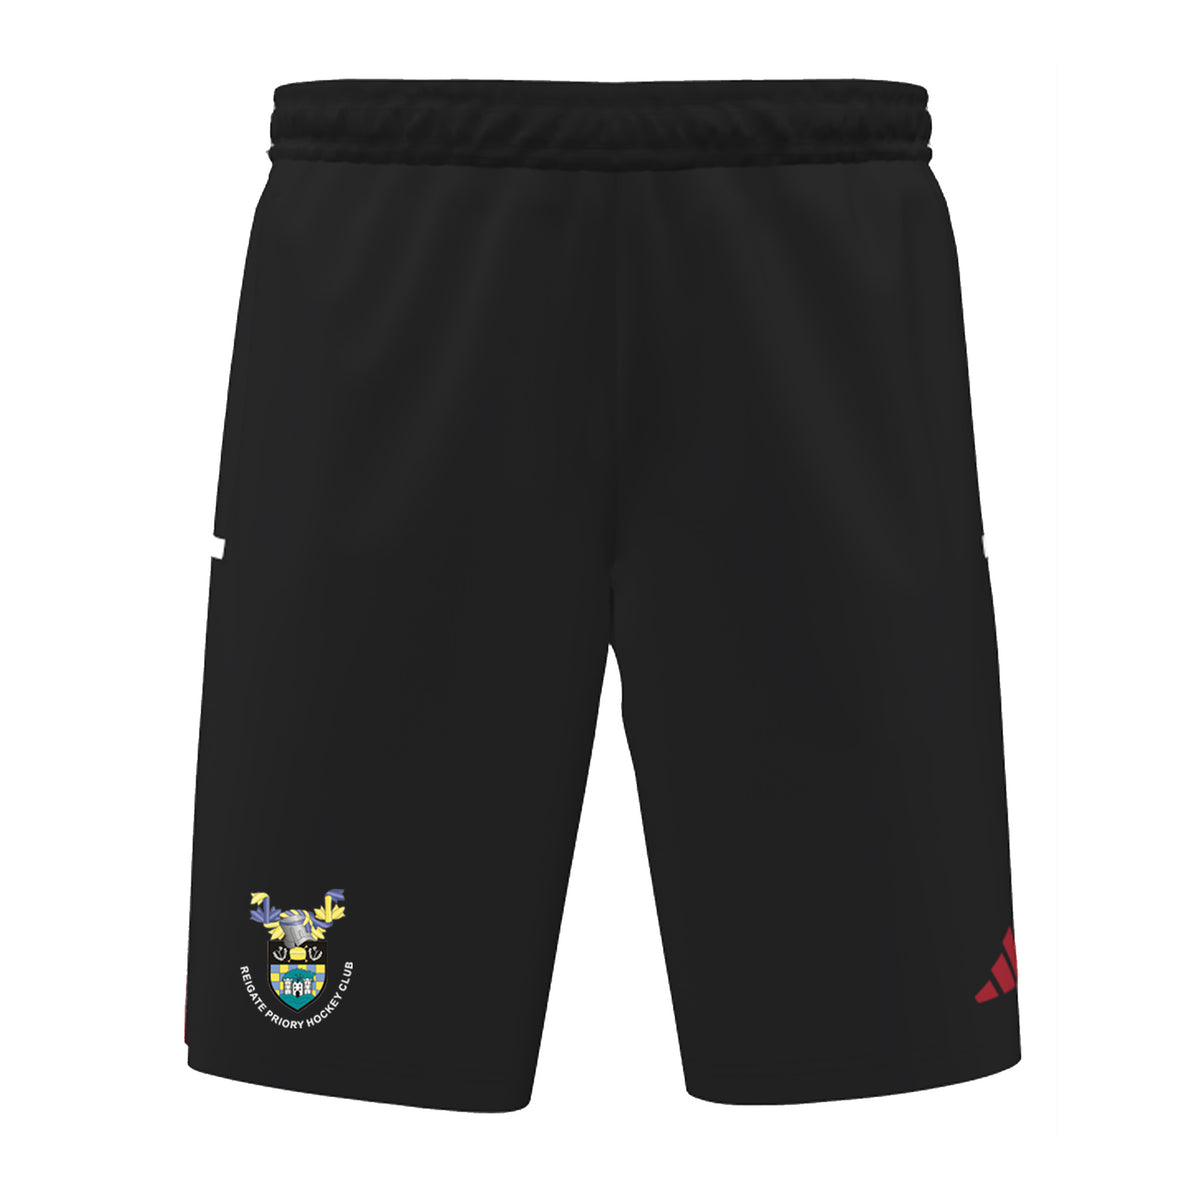 Reigate Priory HC Men's Woven Shorts